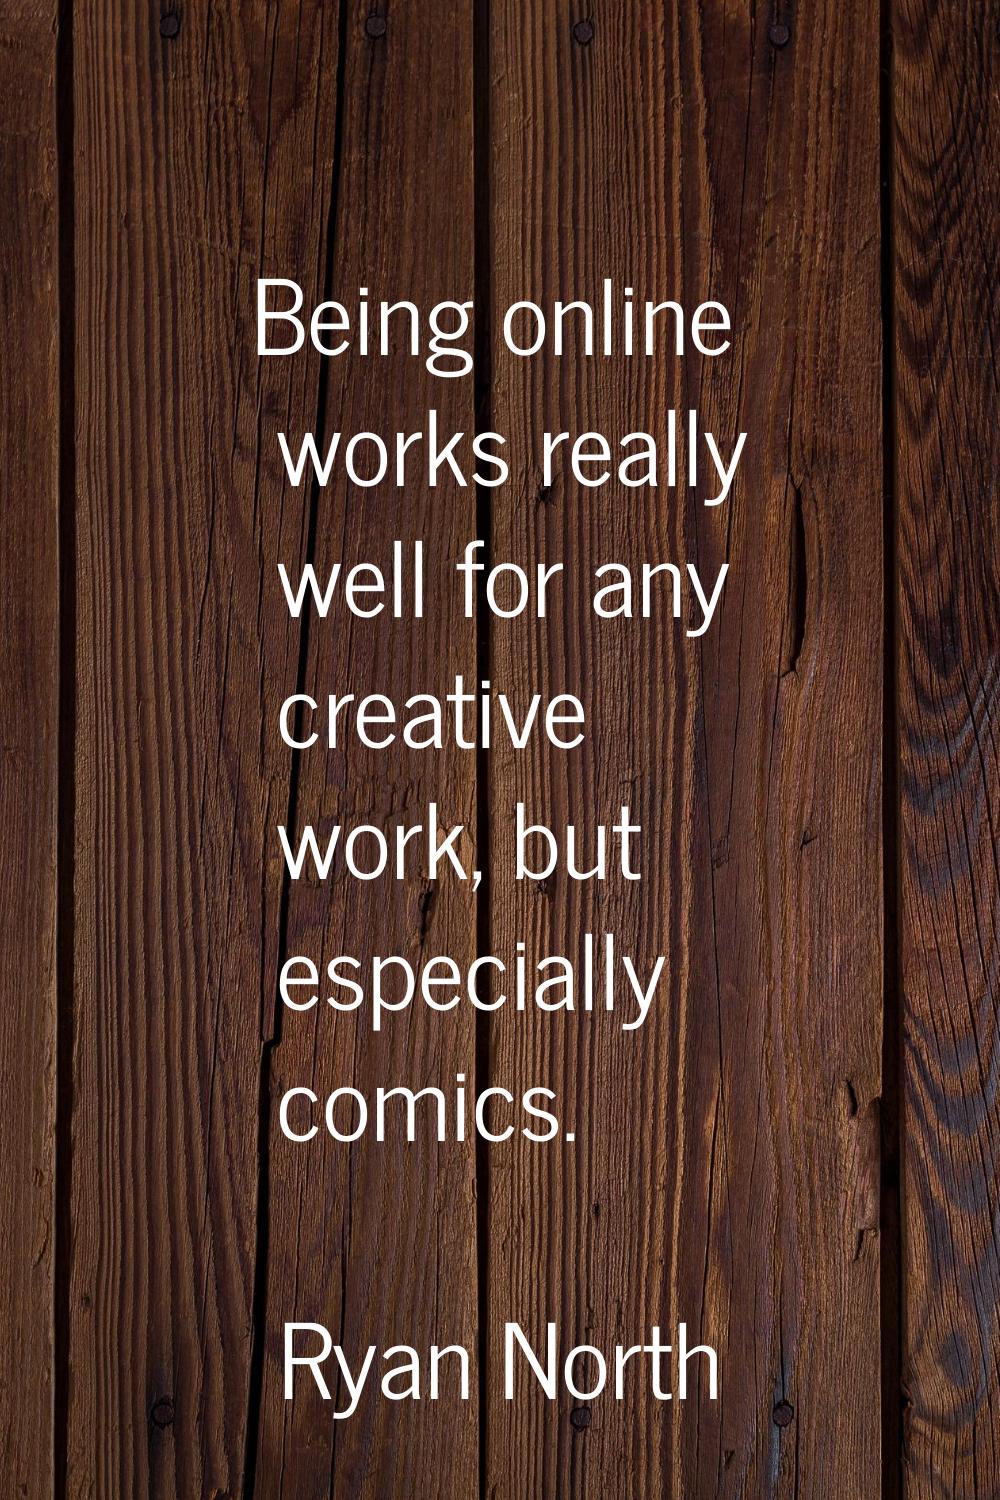 Being online works really well for any creative work, but especially comics.